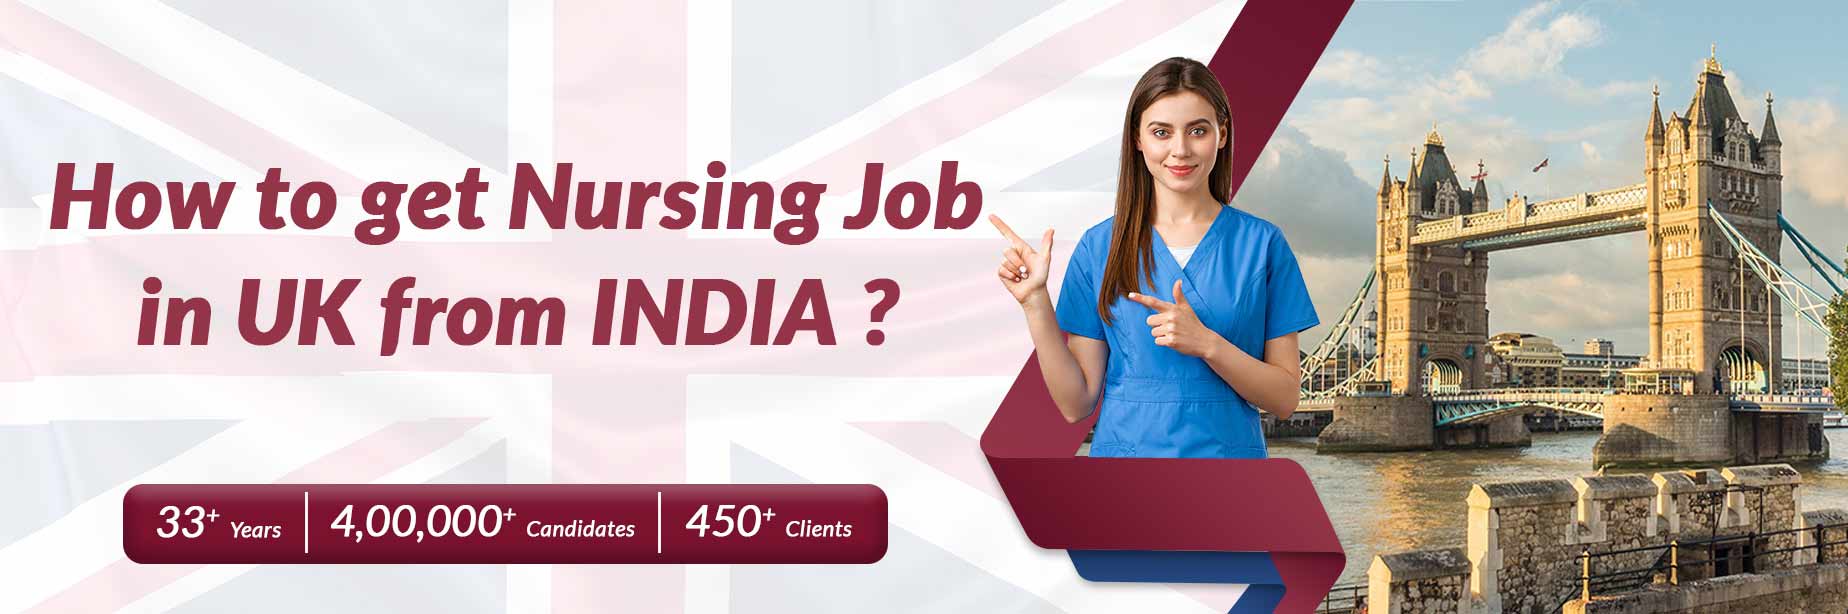 how to get nursing job in uk from indiahow to get nursing job in uk from india